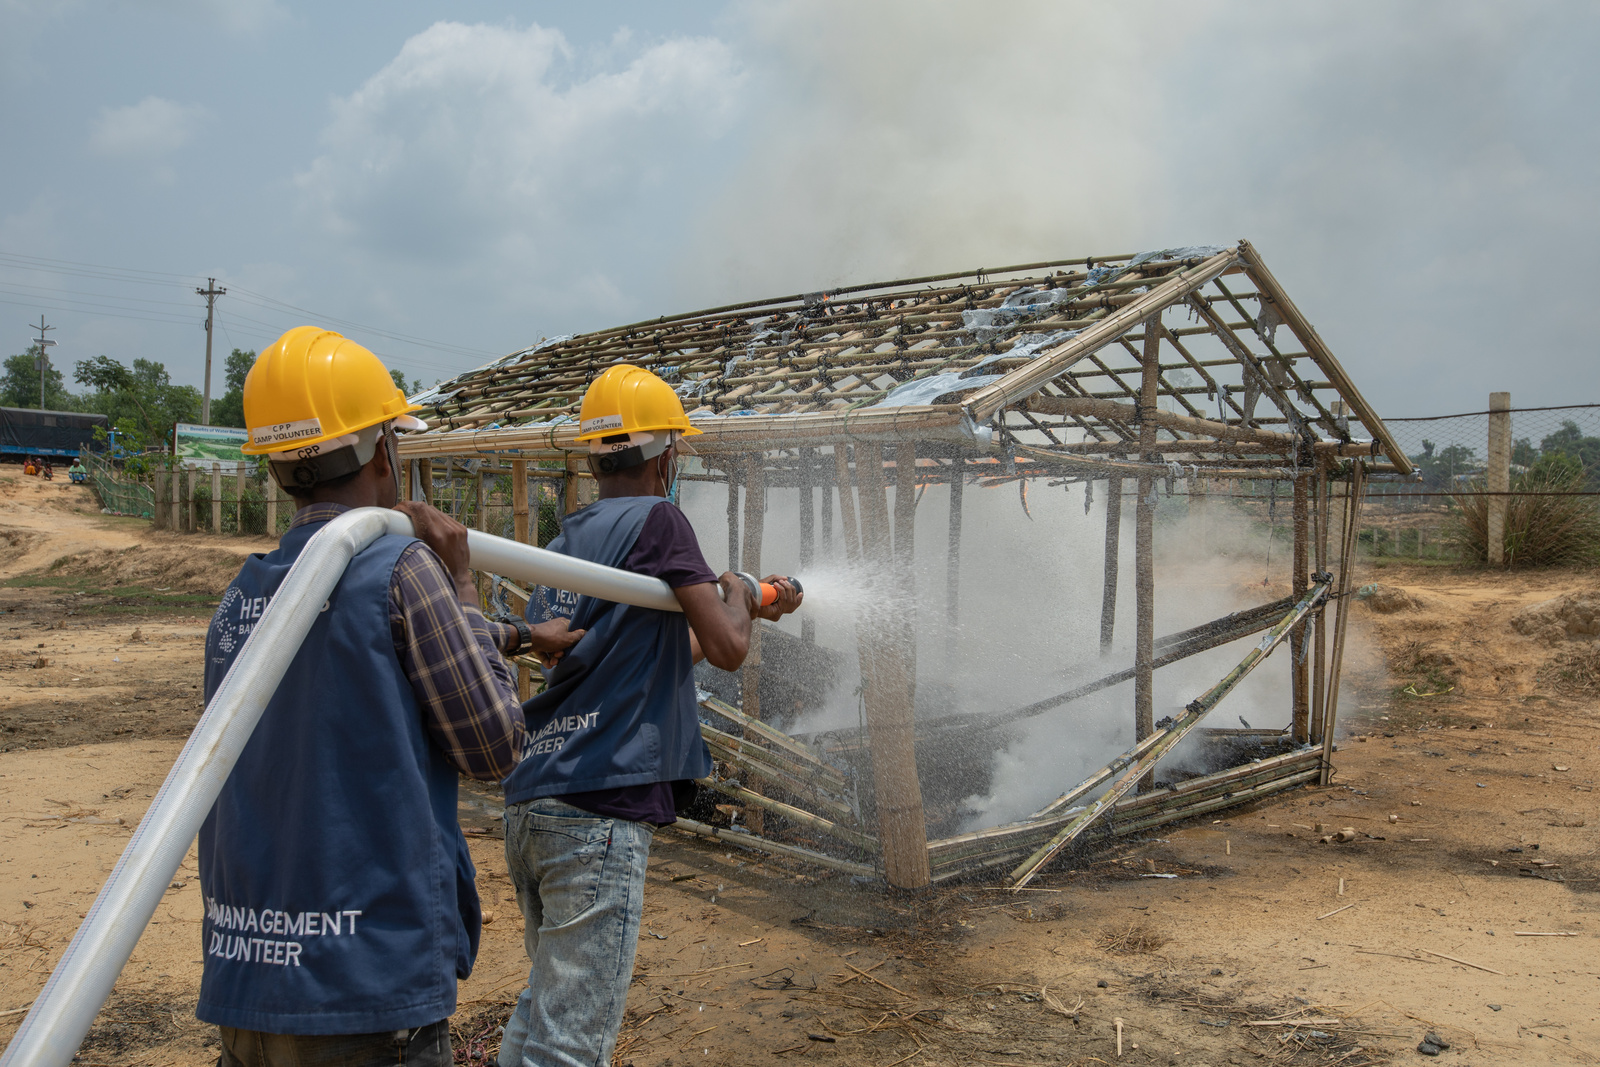 Bangladesh. Refugee volunteers receiving training on how to control fires that break out in shelters